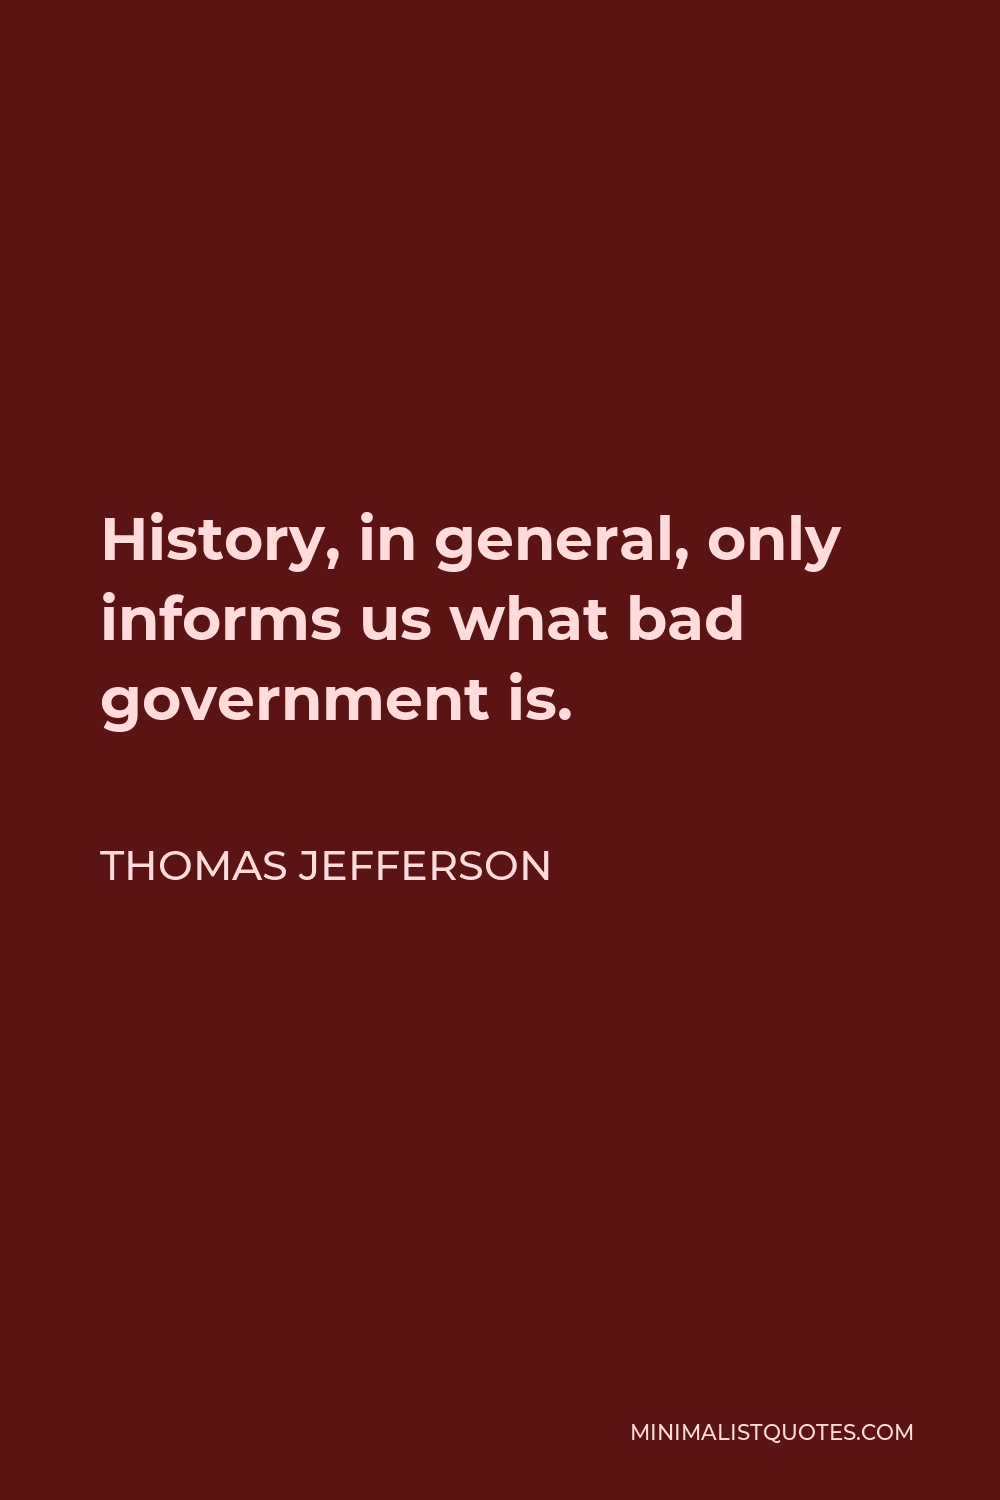 Thomas Jefferson Quote - History, in general, only informs us what bad government is.